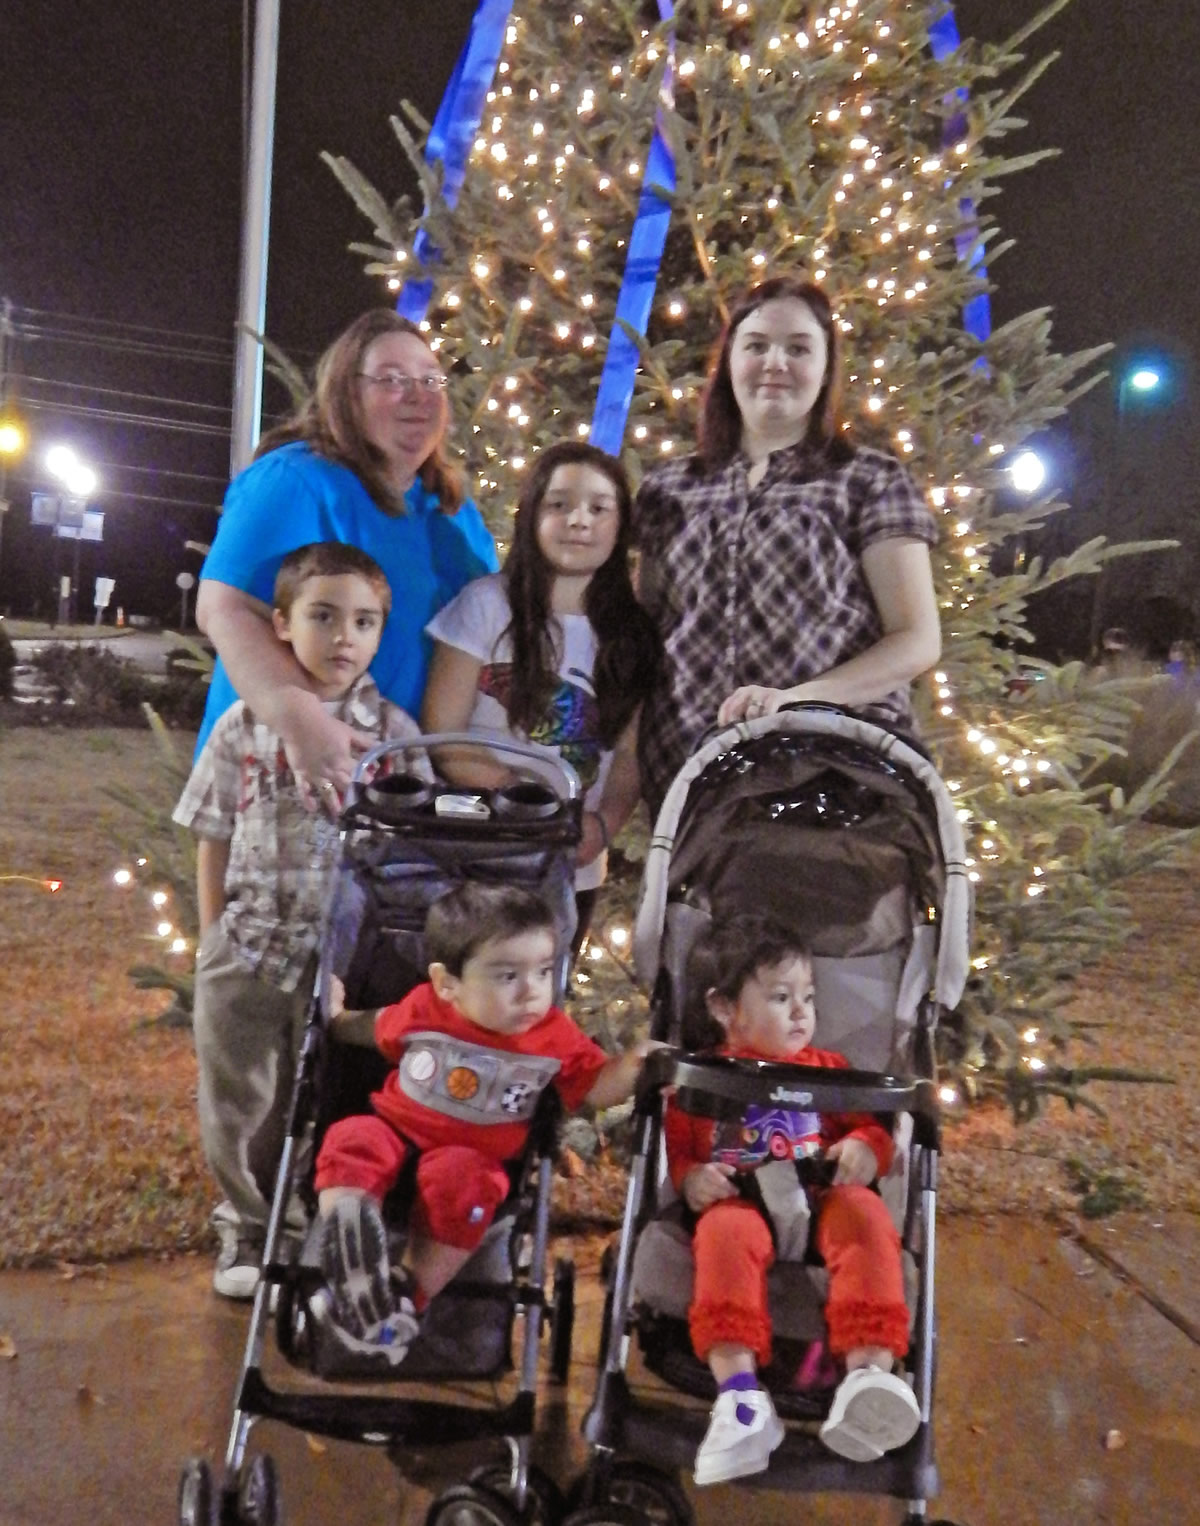 CCCC Christmas Tree Lighting brings out community